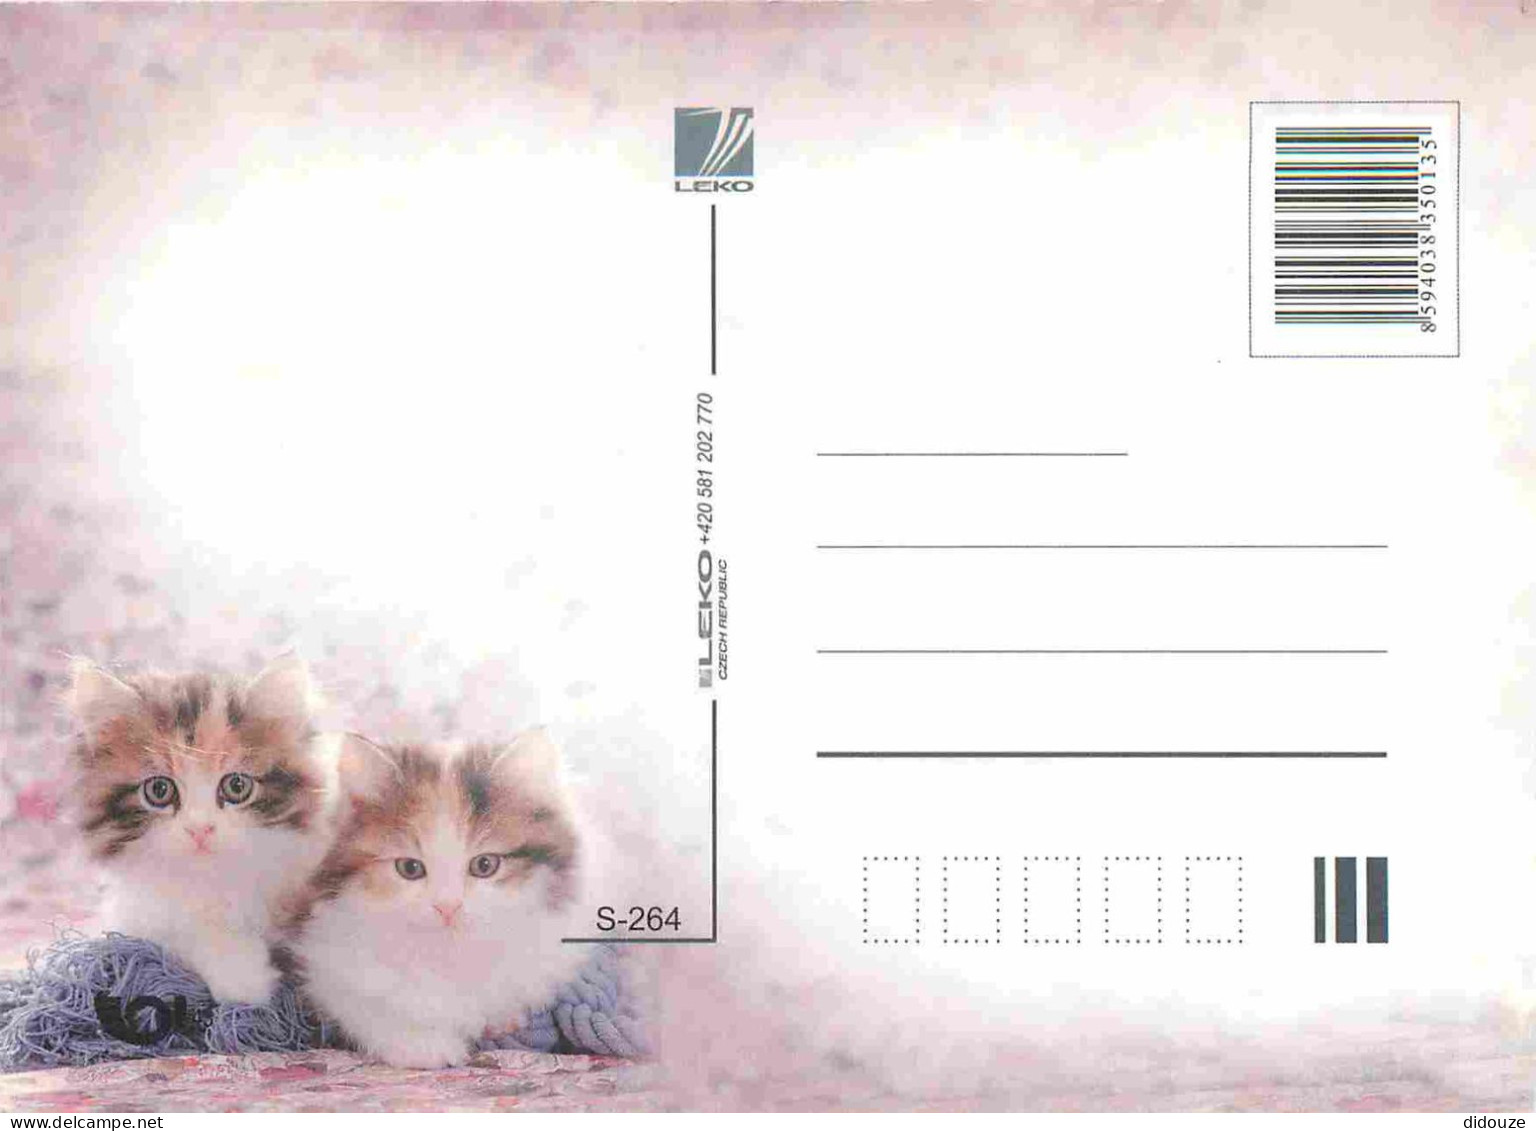 Animaux - Chats - CPM - Voir Scans Recto-Verso - Cats